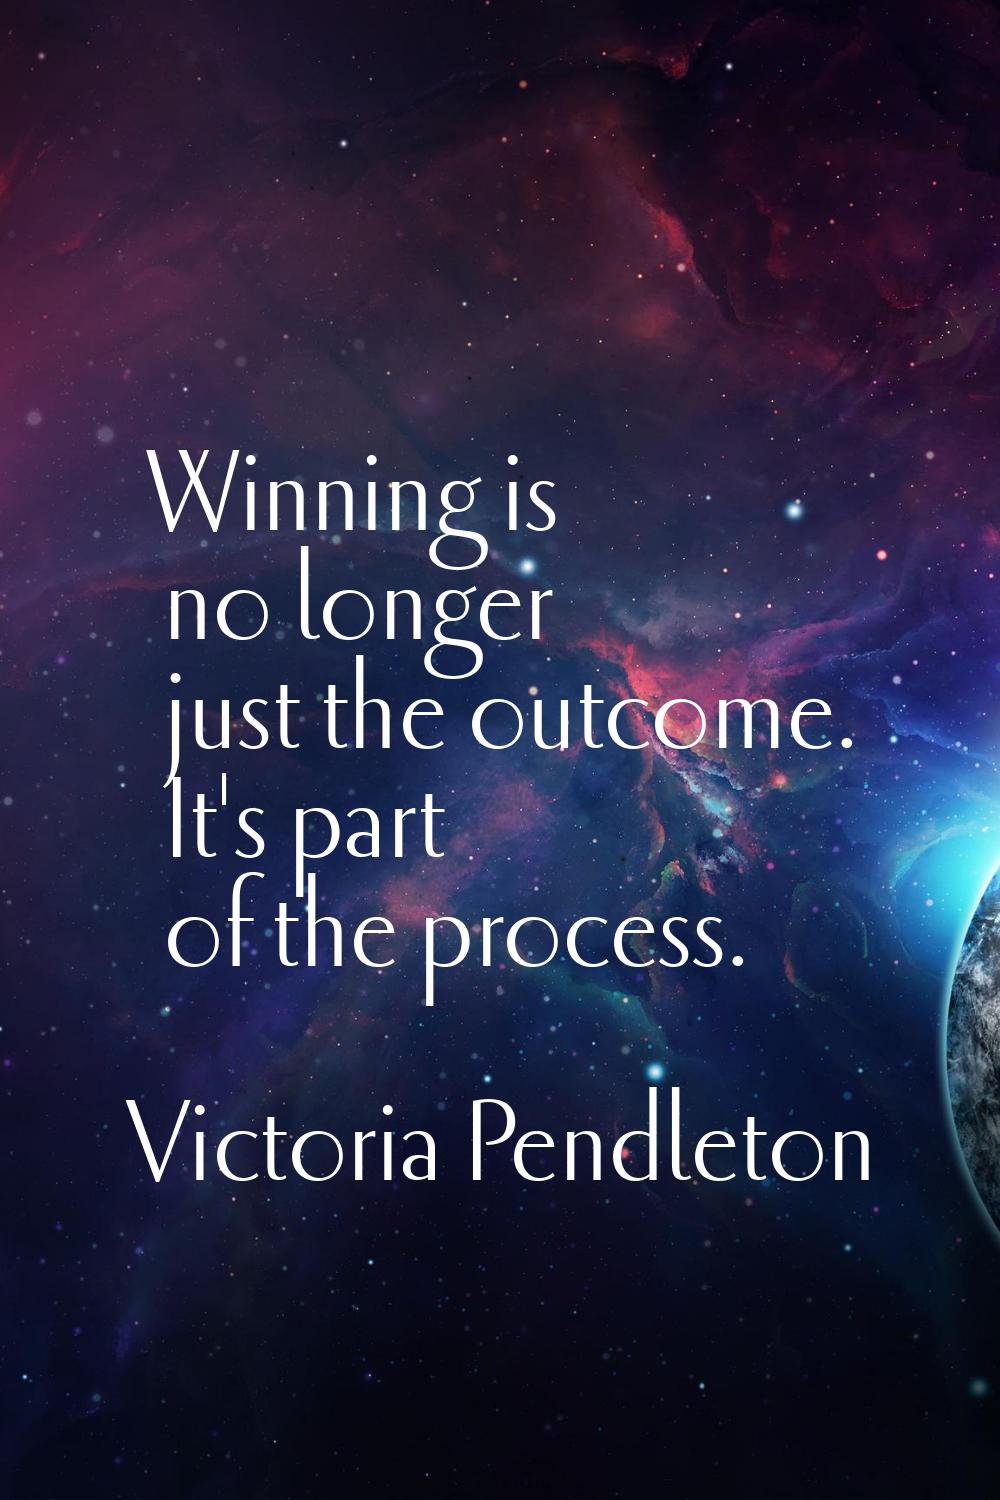 Winning is no longer just the outcome. It's part of the process.